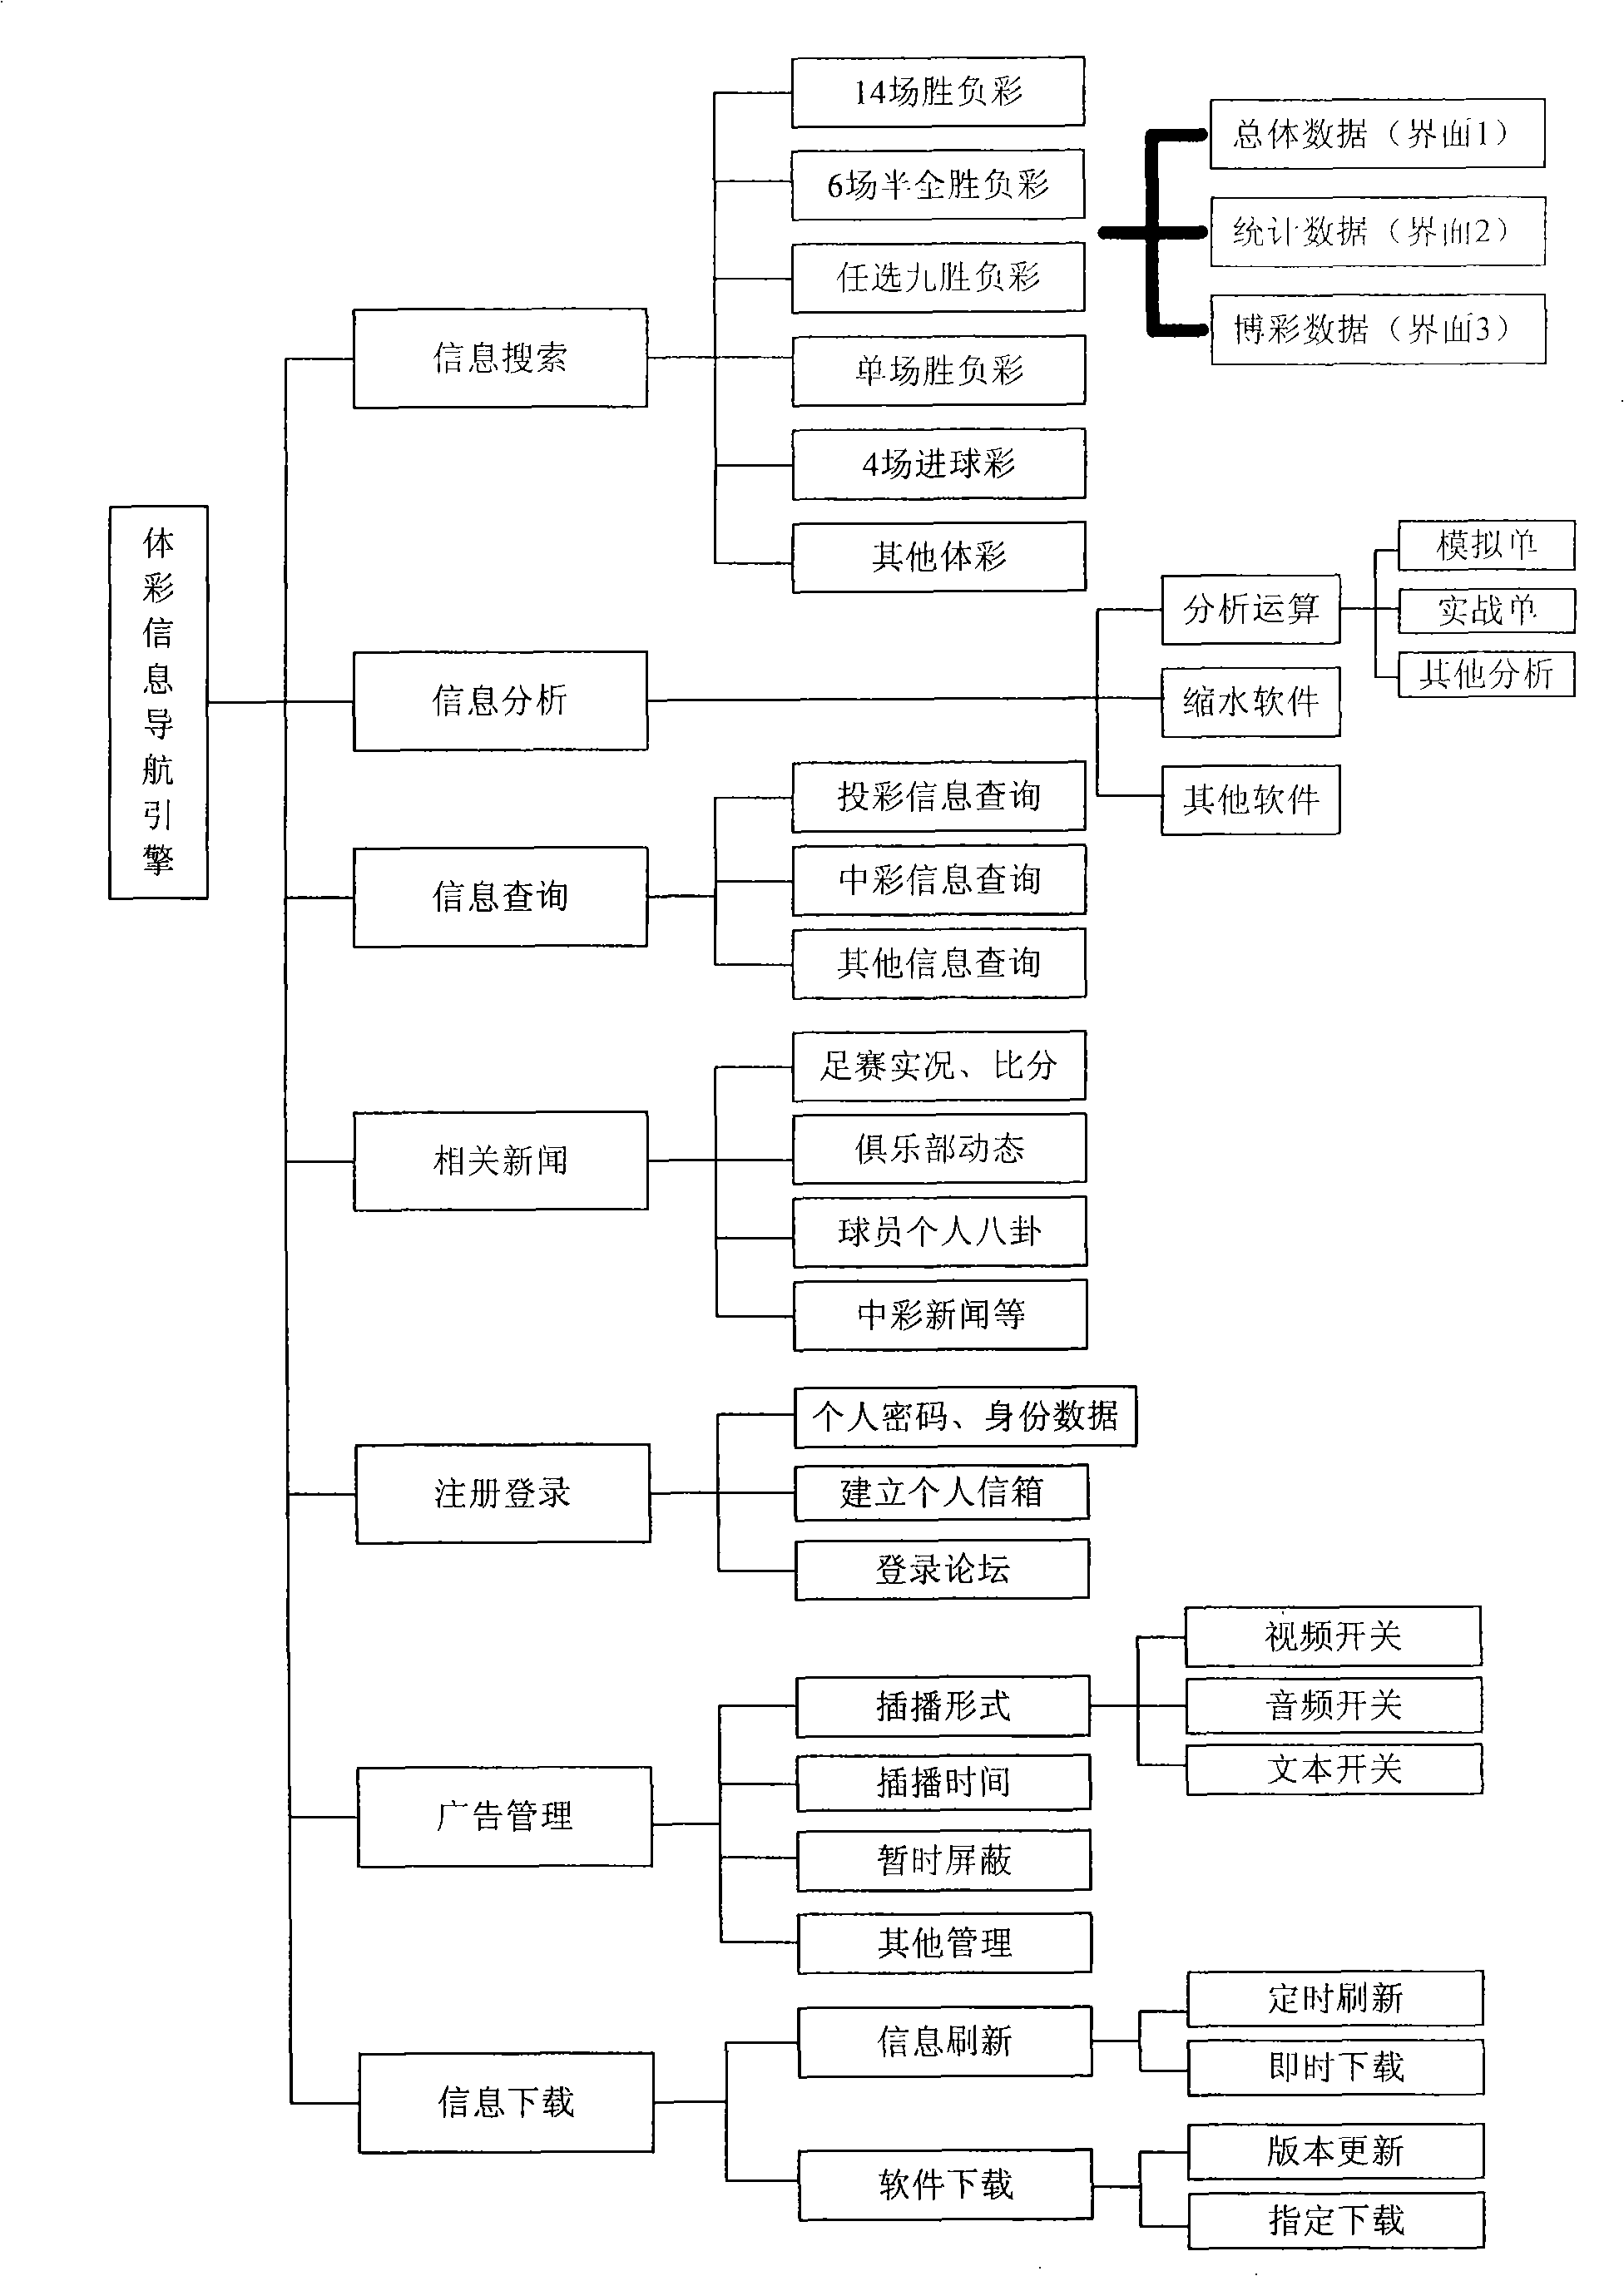 Electronic information browsing device